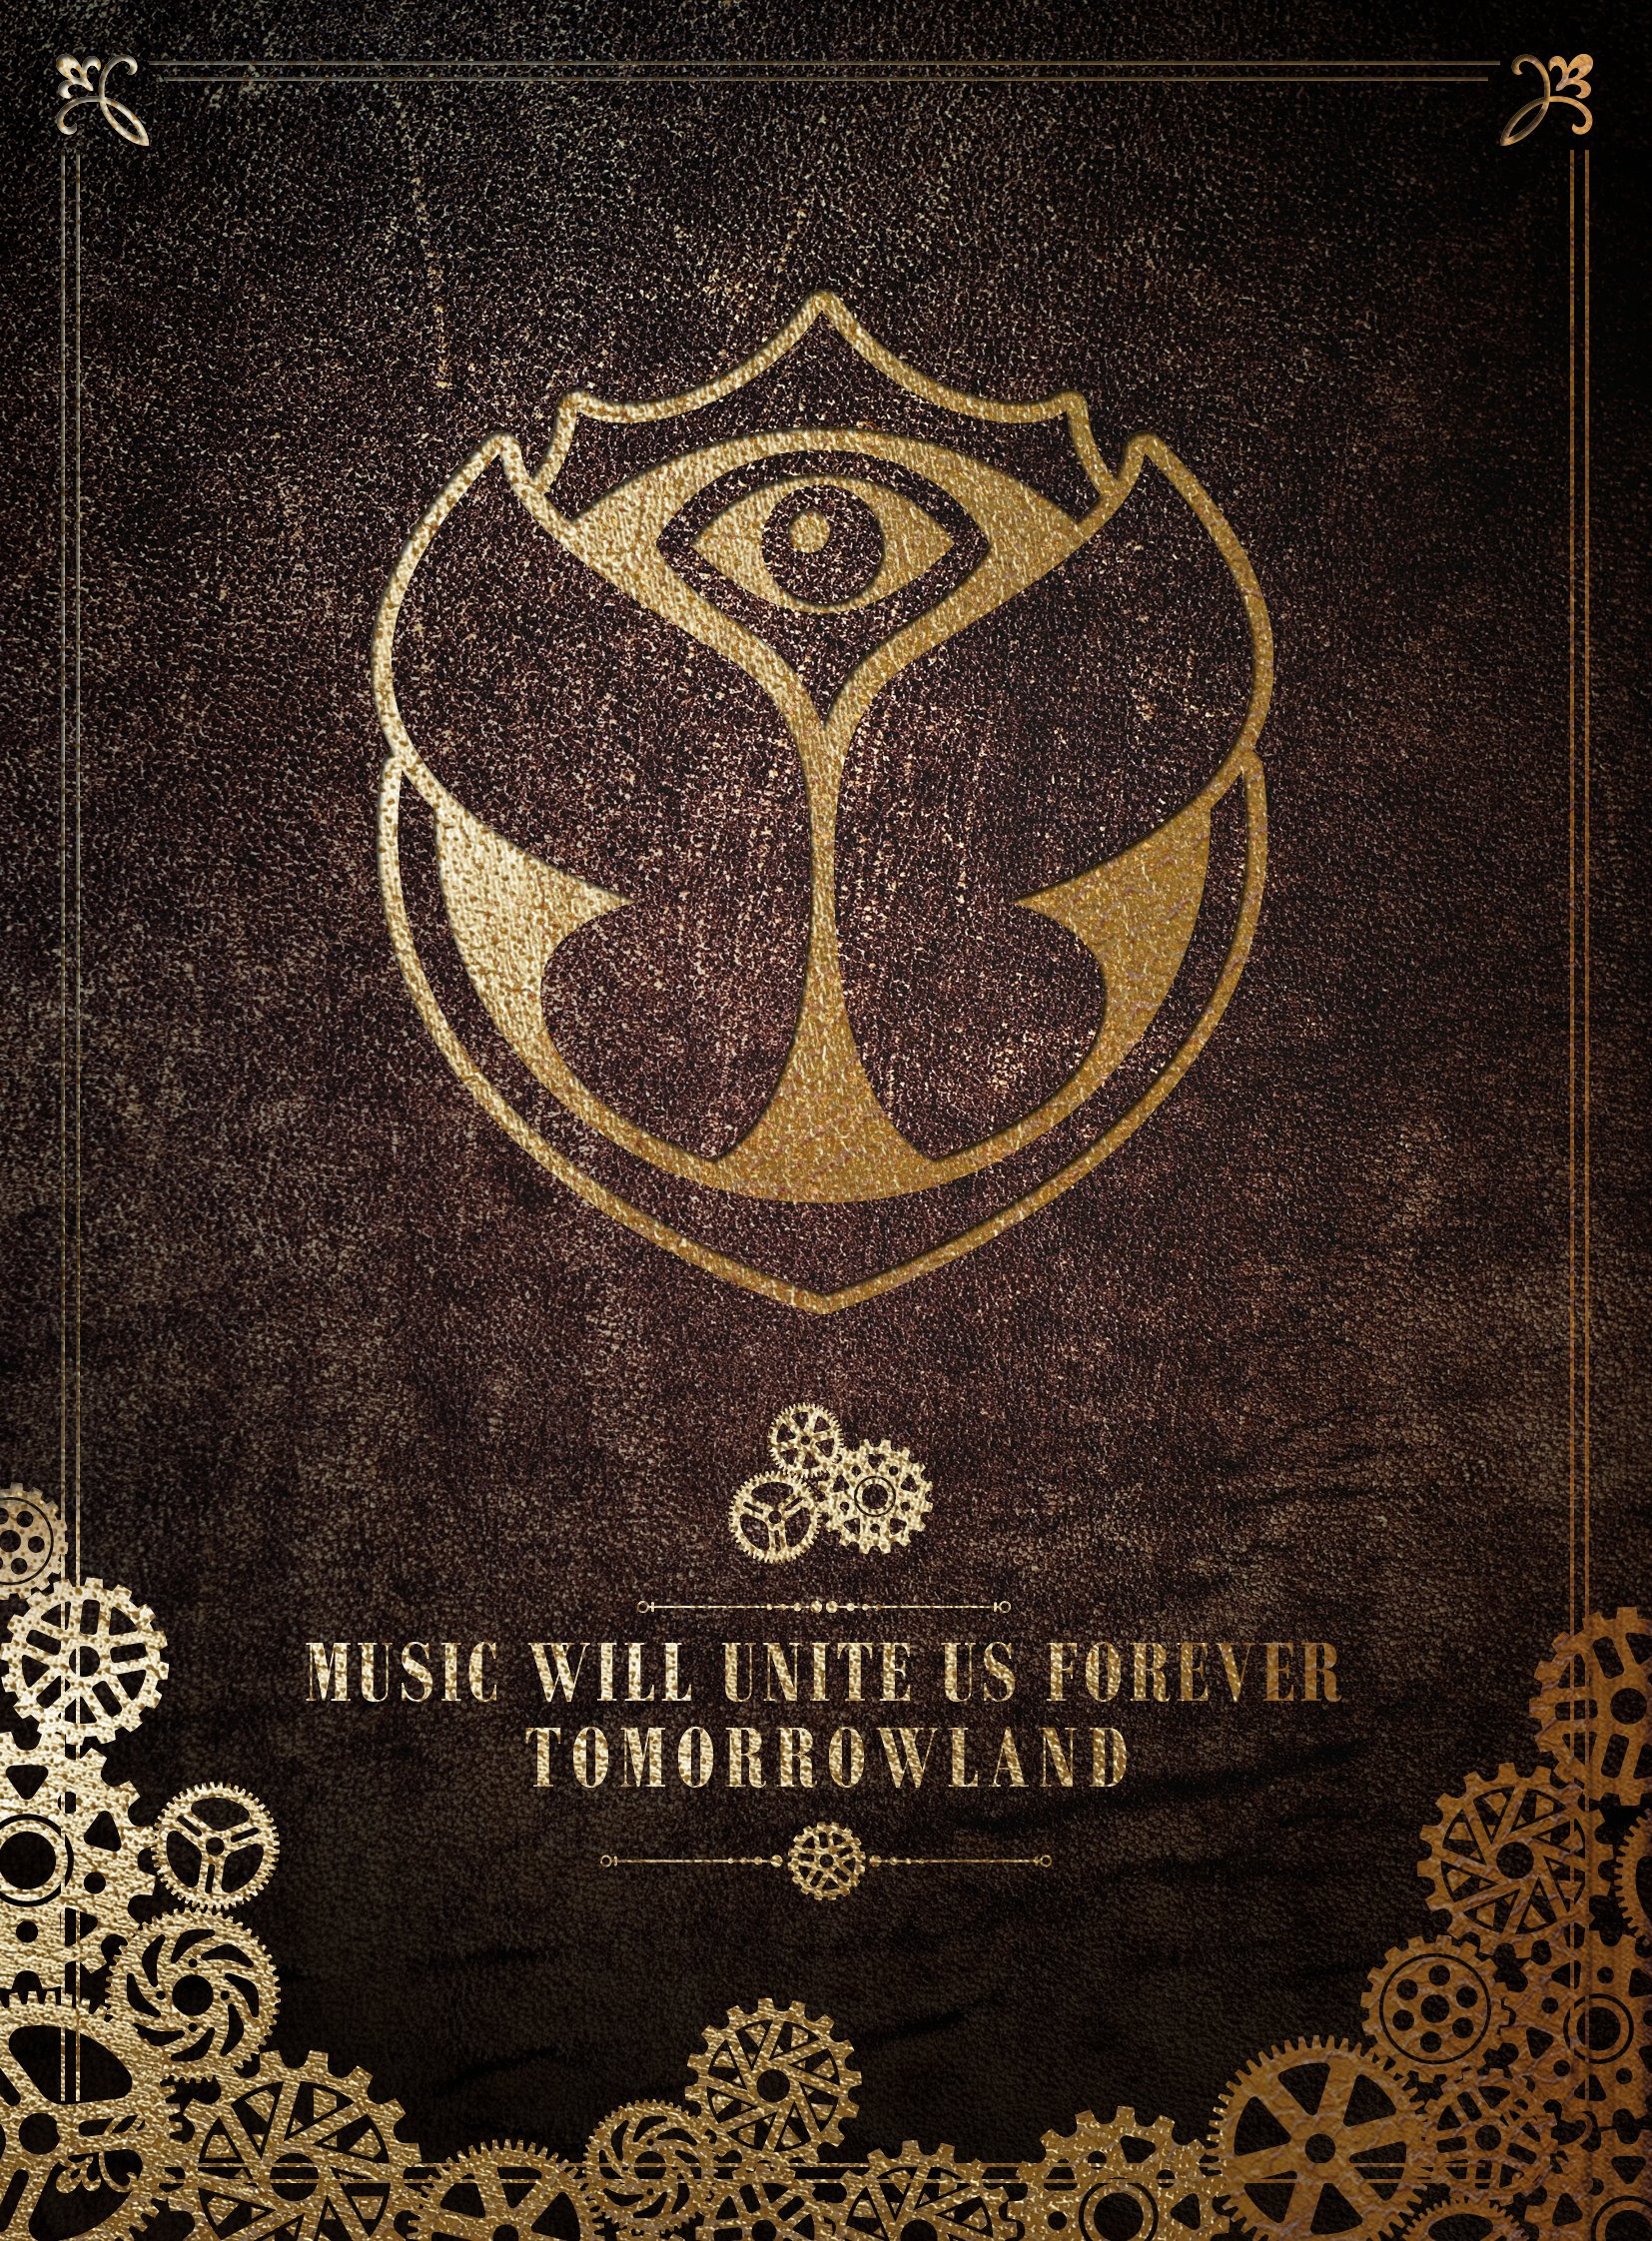 Once Upon a Time, in a Tomorrowland Far Far Away